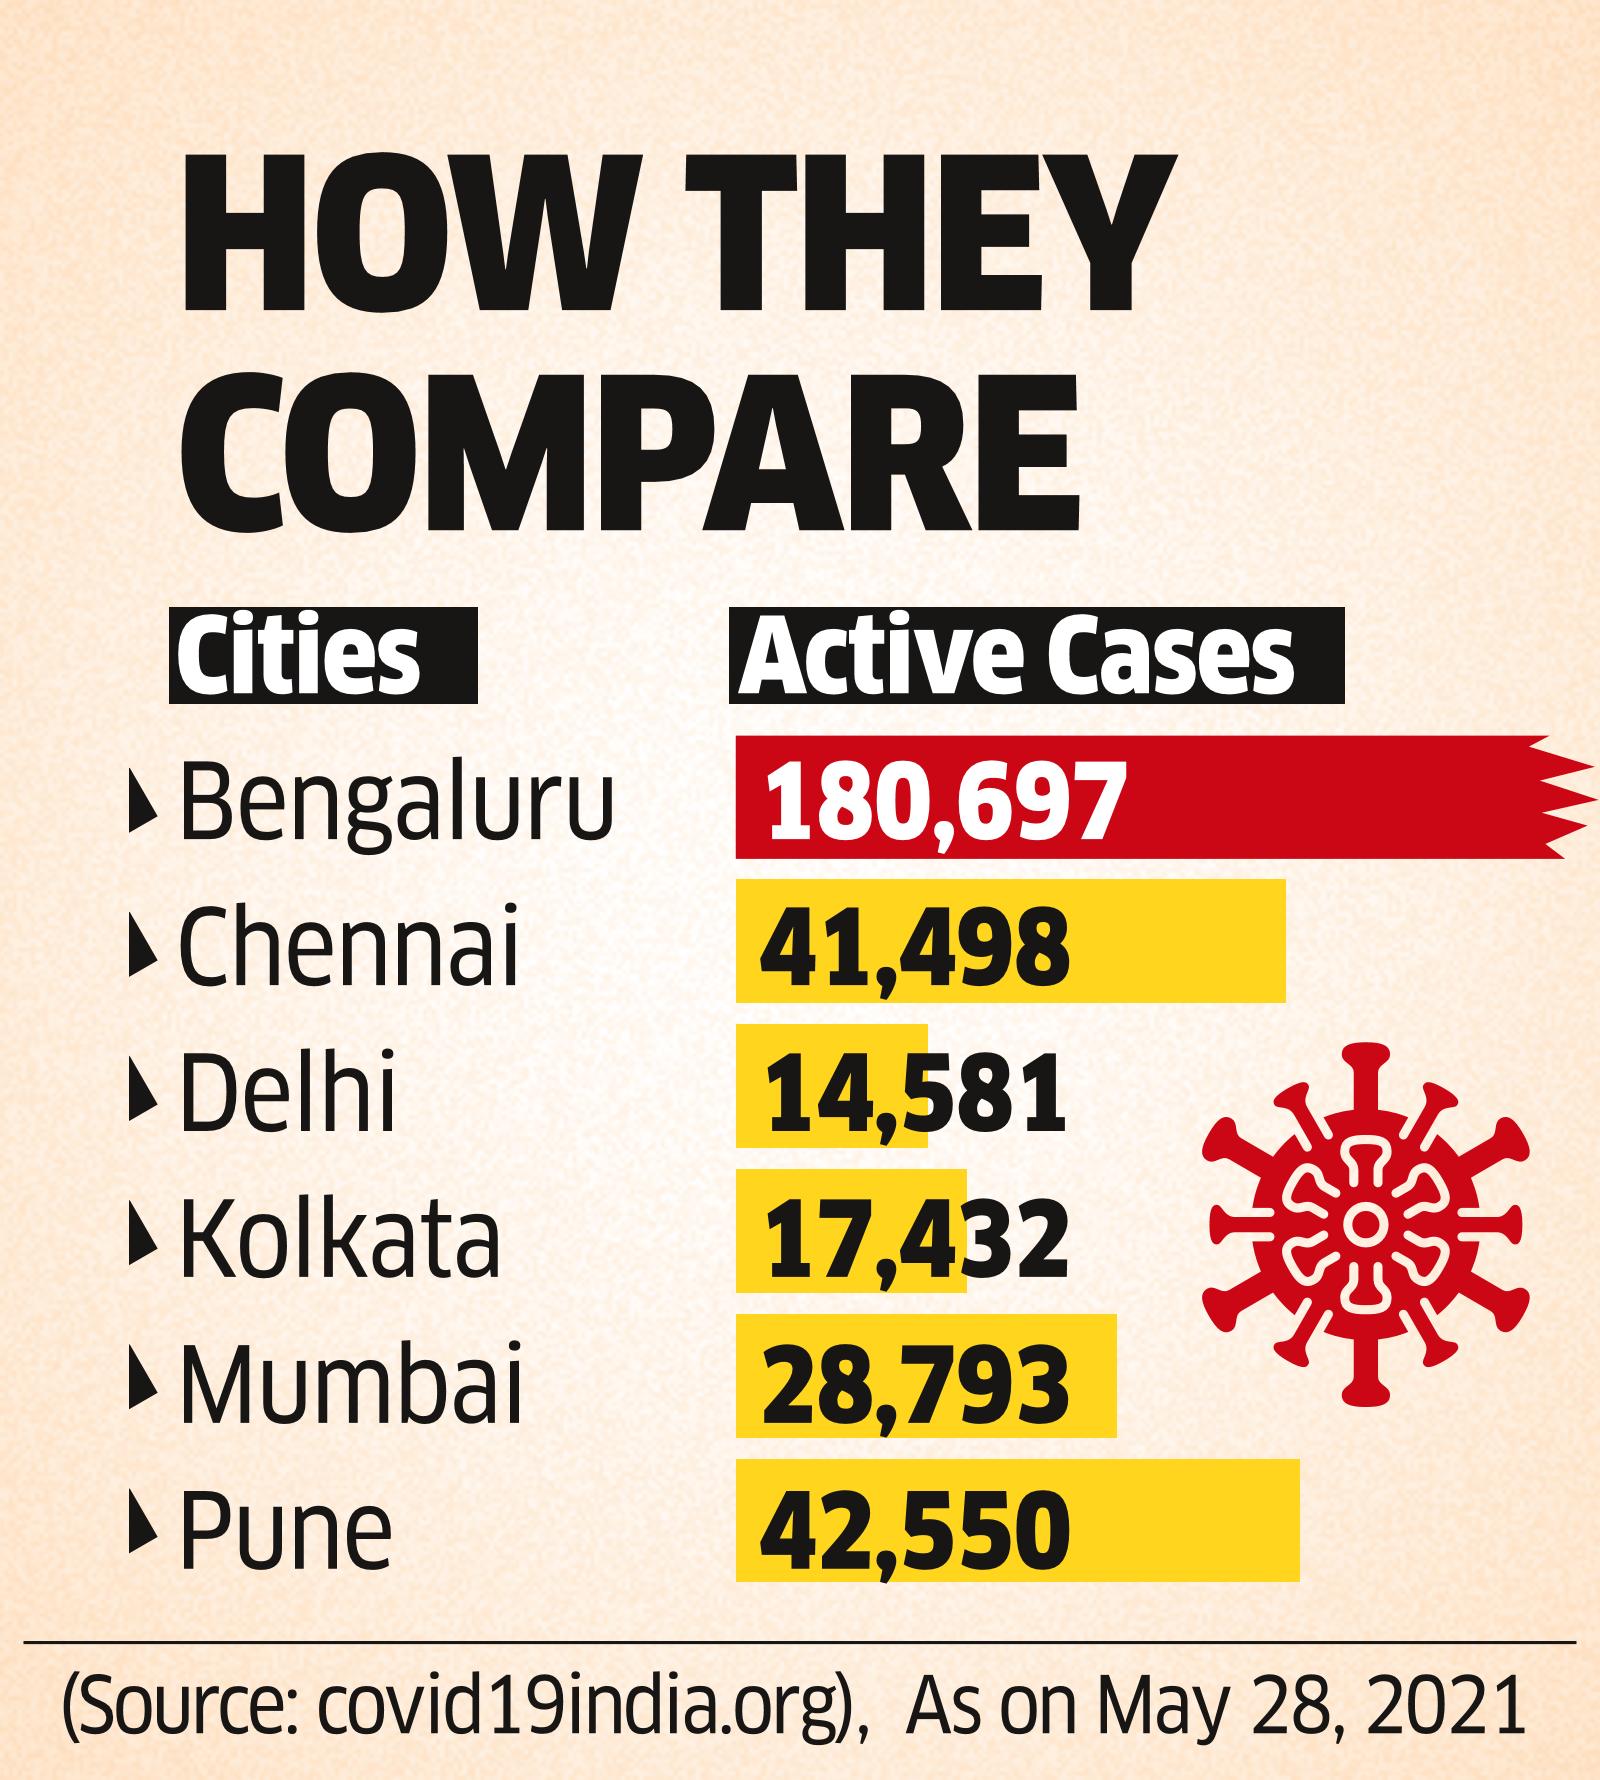 bluru has highest no of active covid cases among cities